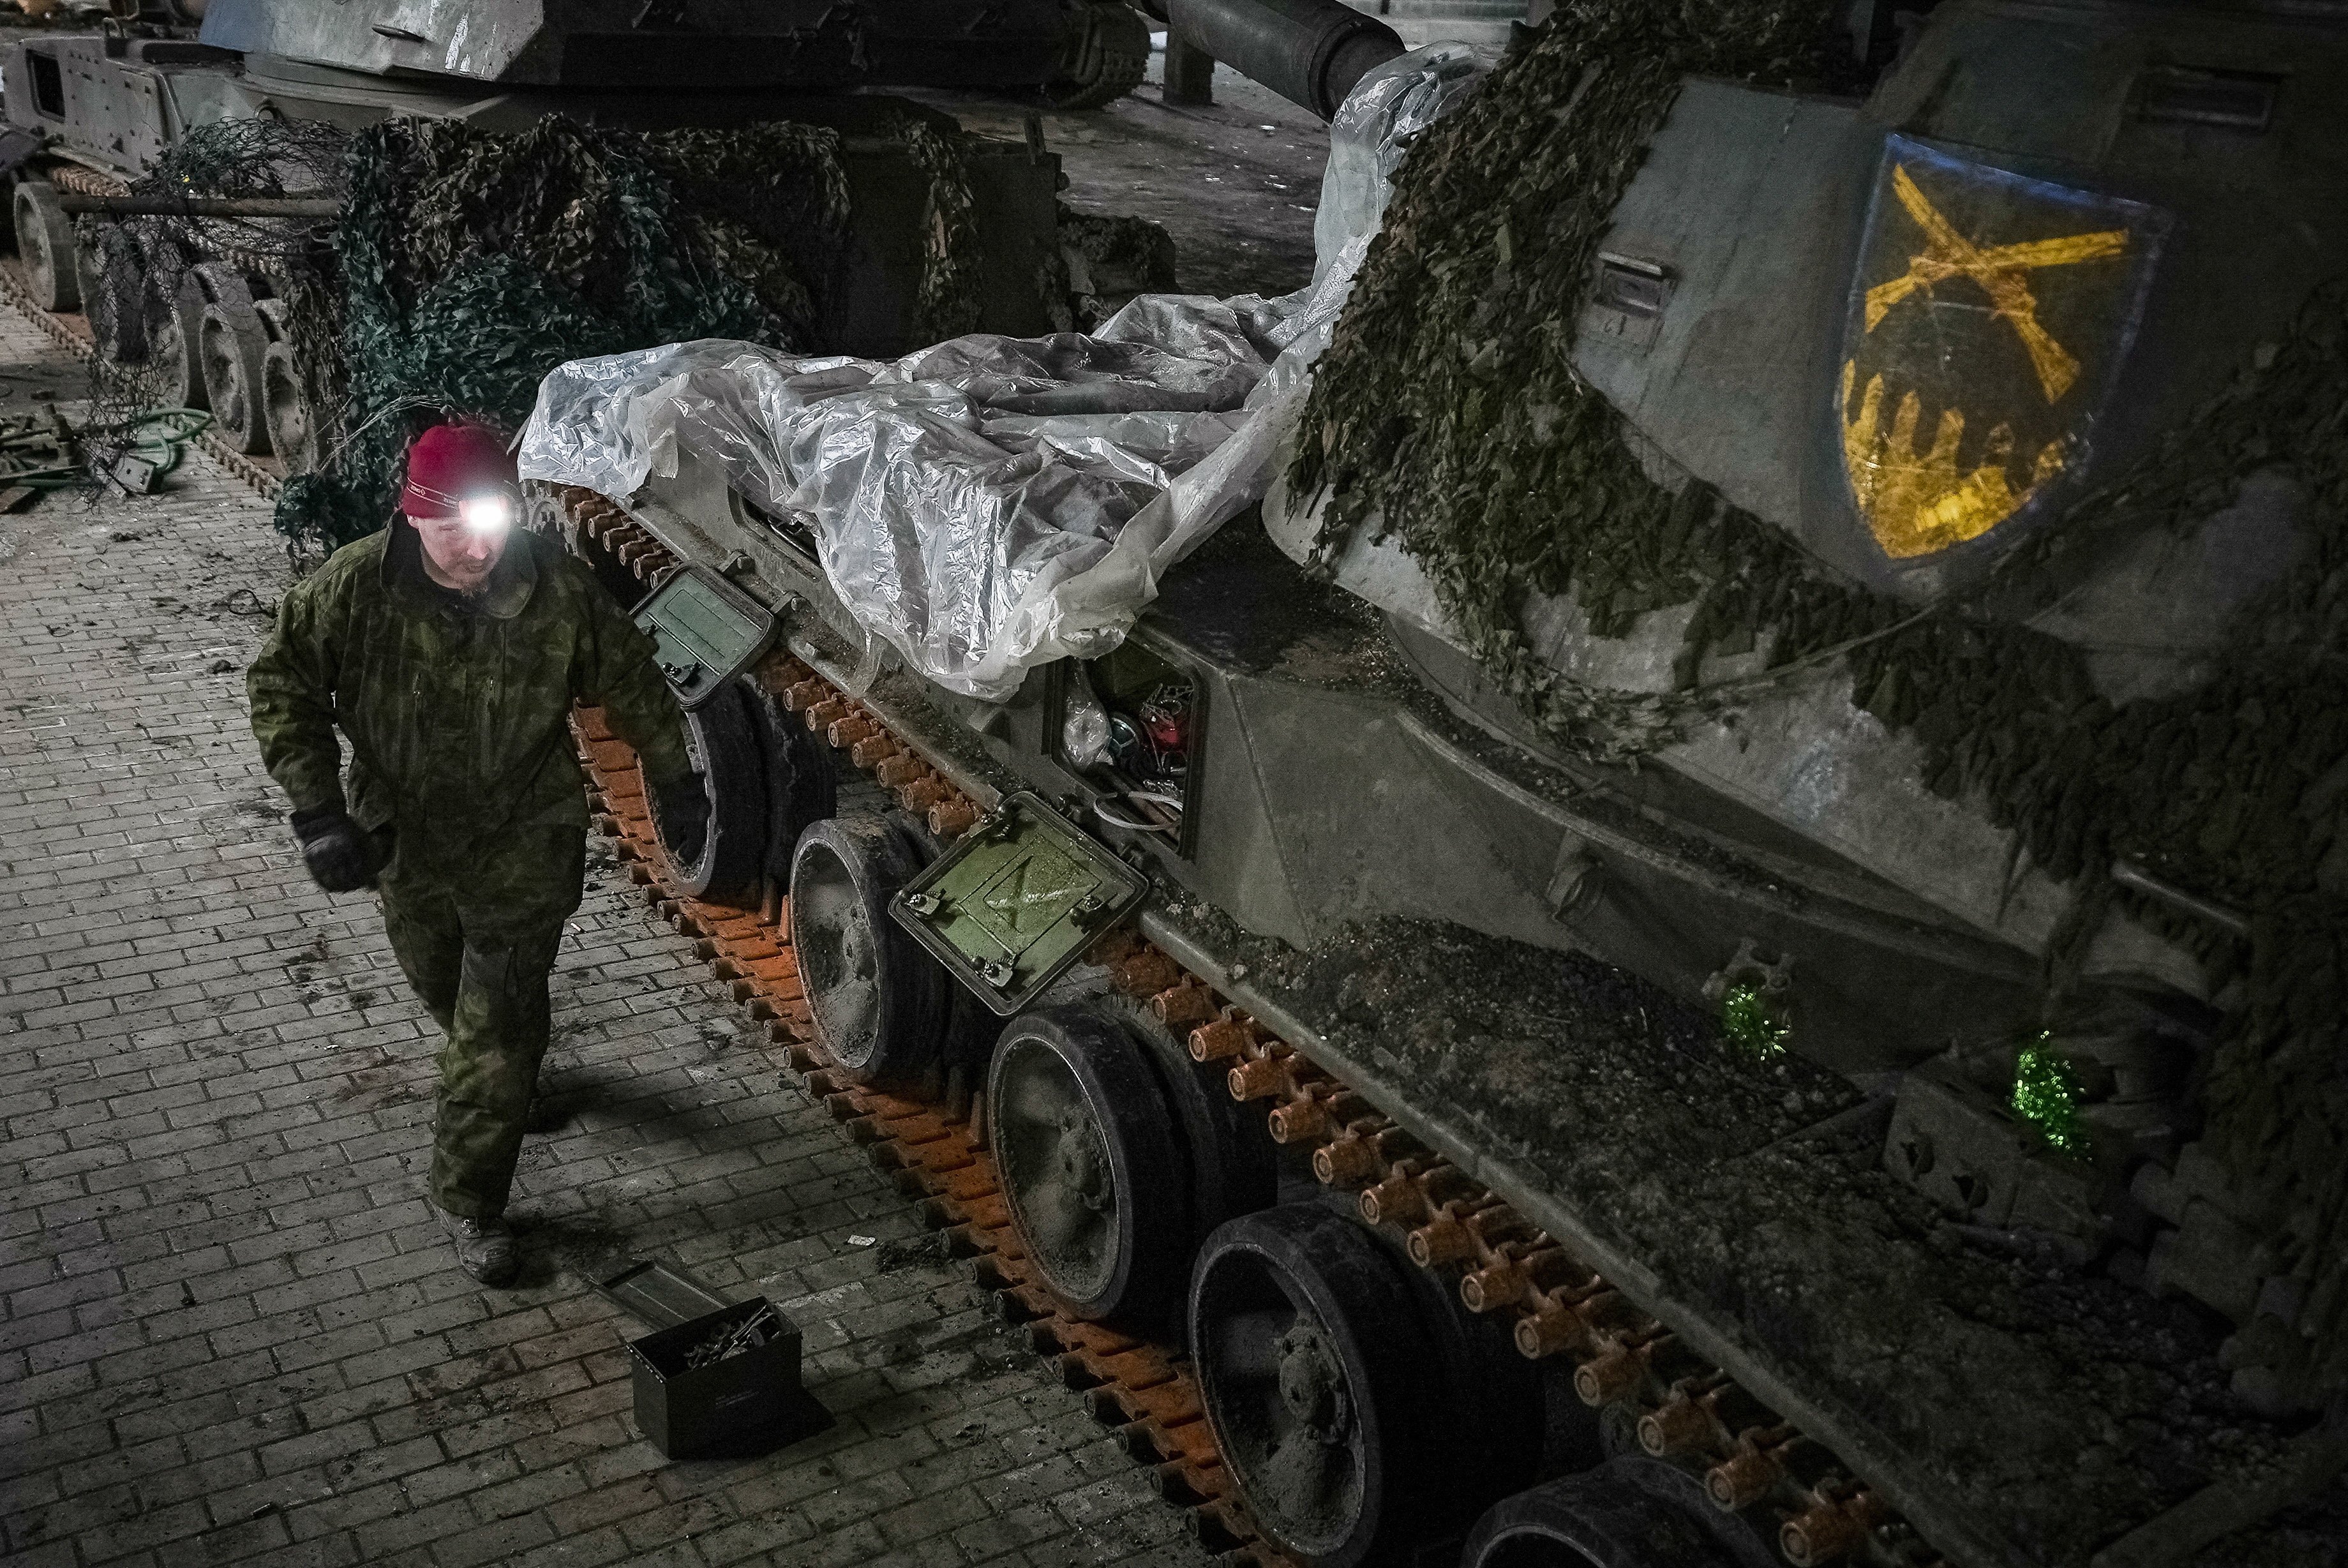 A Ukrainian serviceman repairs a self-propelled howitzer in the Donetsk region on January 21. Photo: Reuters